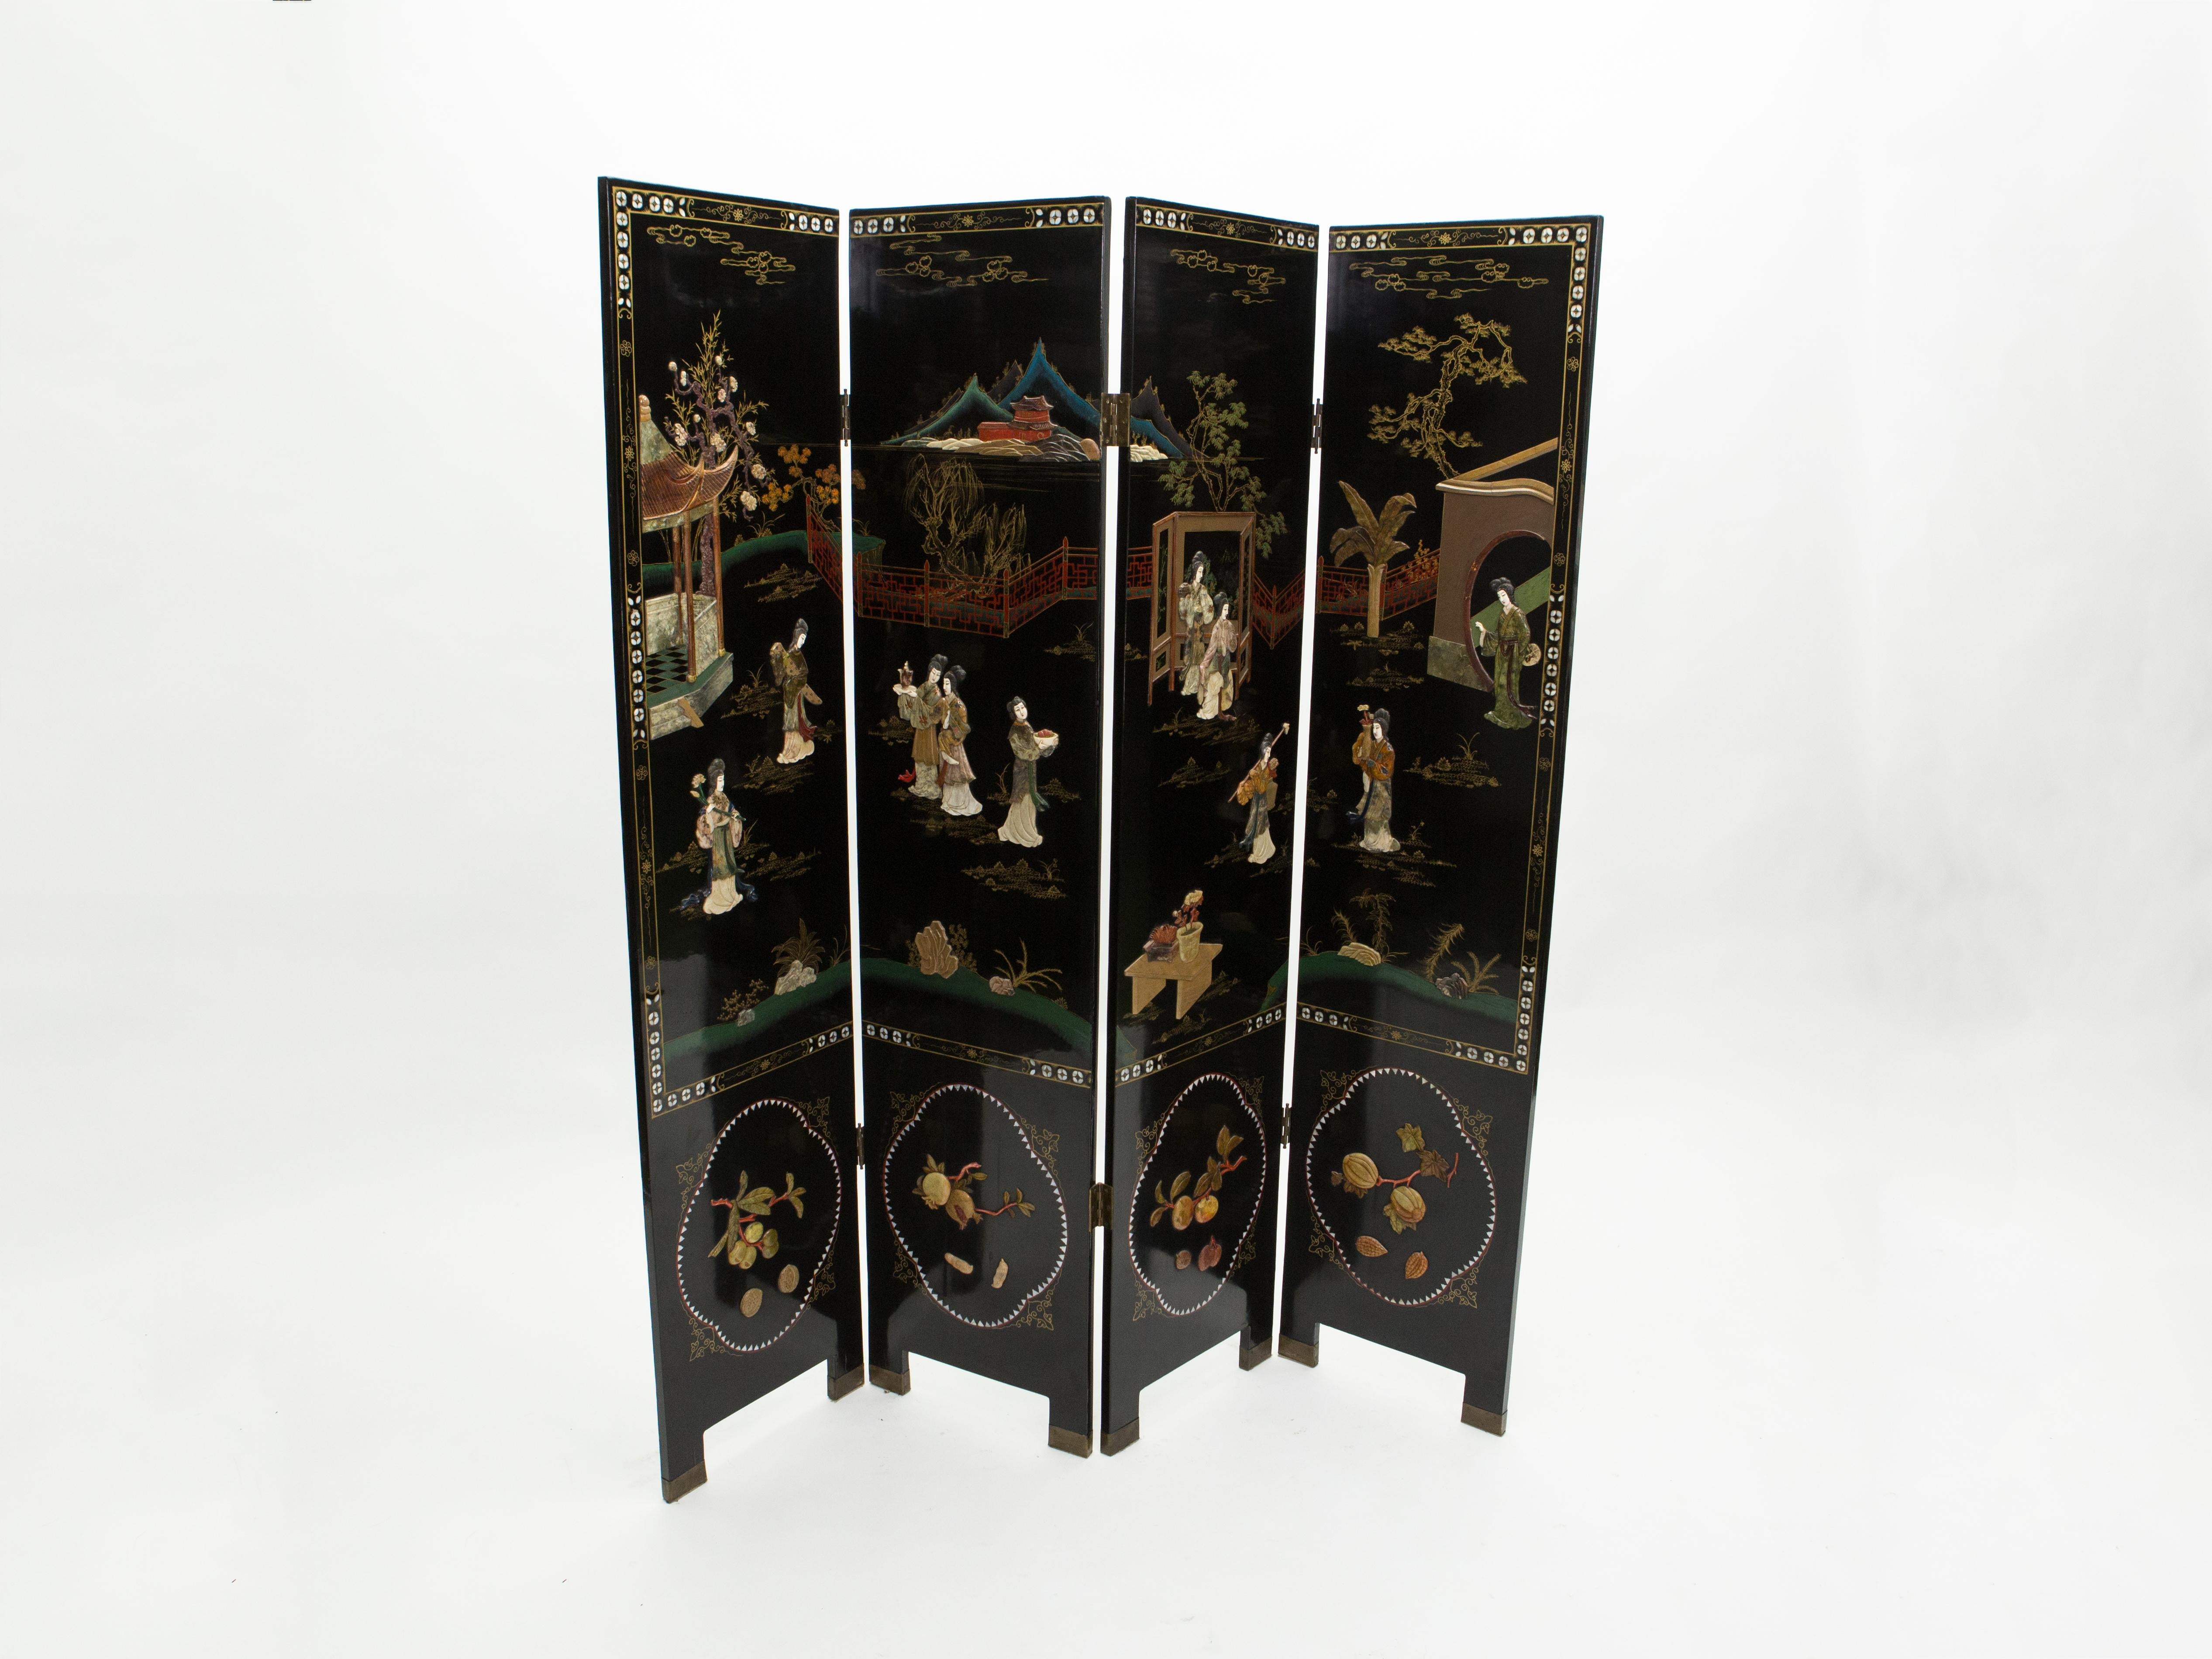 Beautiful 1940s Chinese four-panel lacquered screen featuring a courtyard scene of women engaged in leisurely activities on one side, and colorful birds and foliage on the other side. The panels are lacquered, with soft pastel color pigments,